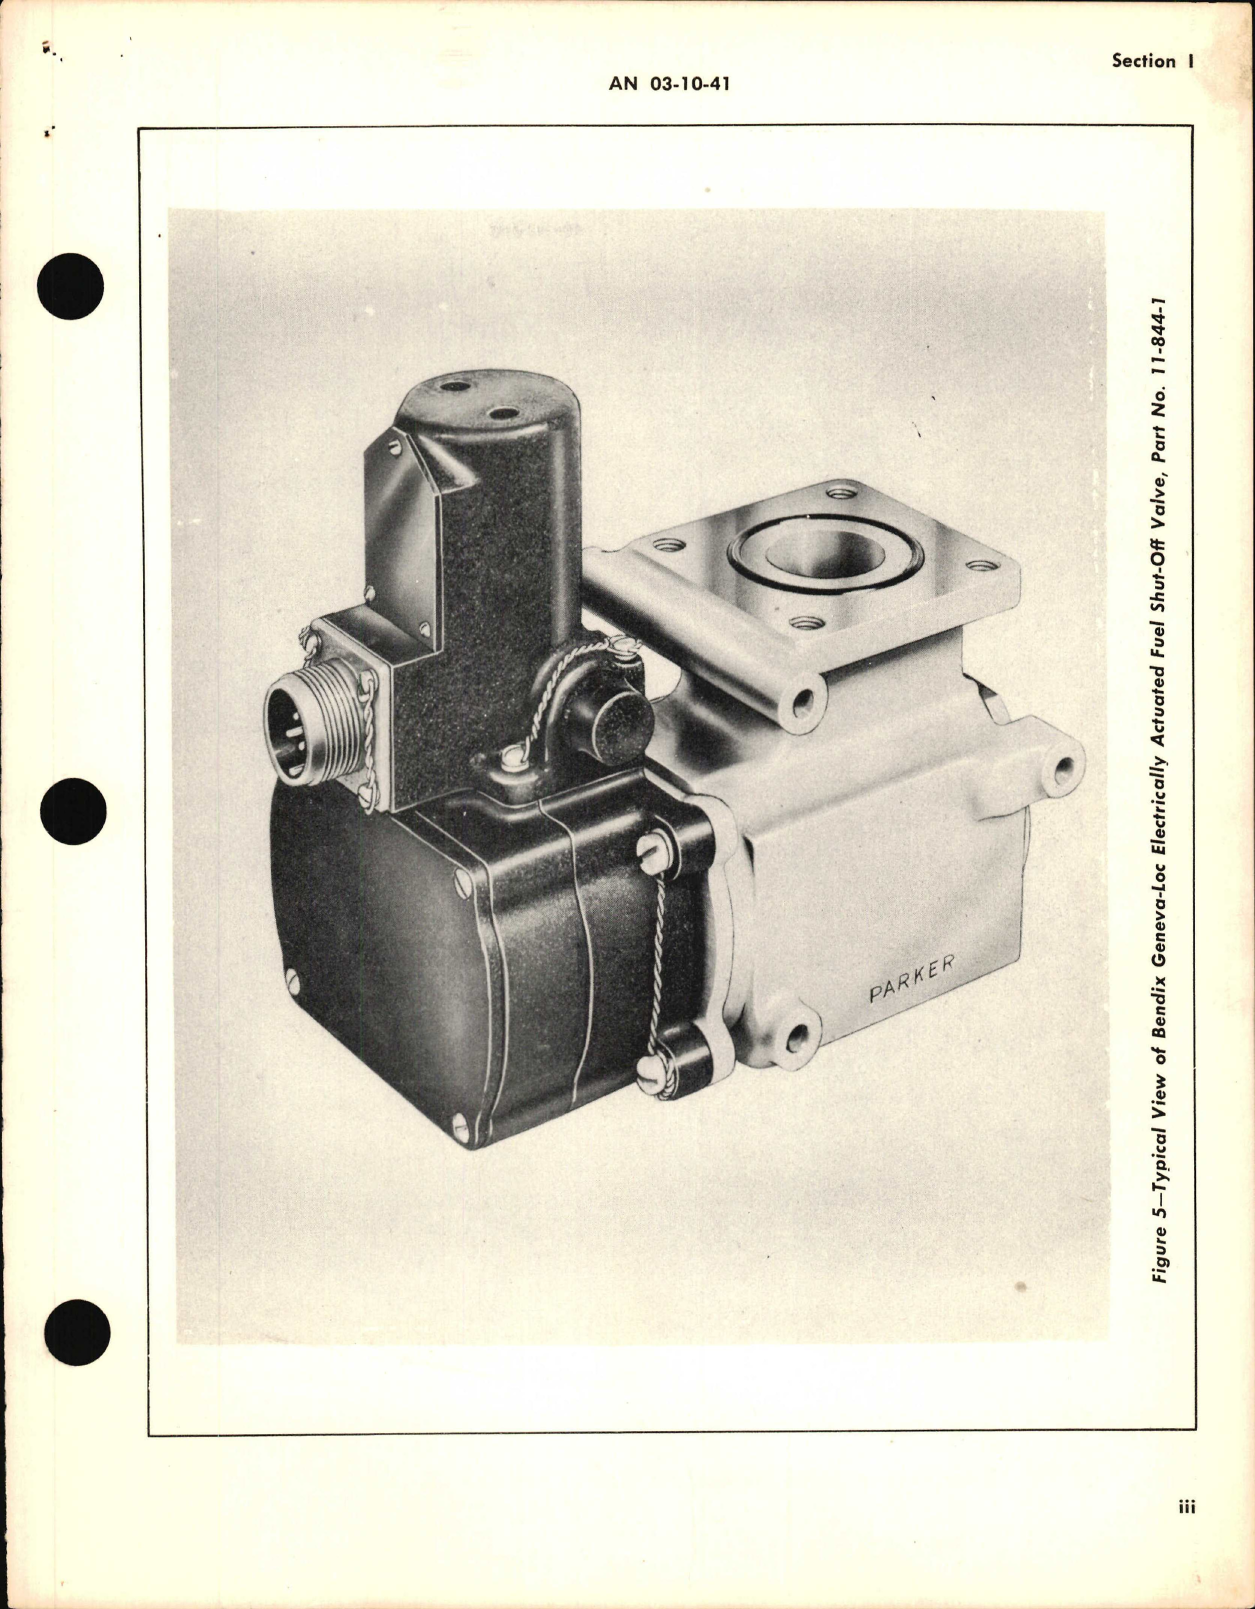 Sample page 5 from AirCorps Library document: Operation, Service, and Overhaul Instructions with Parts Catalog for Balanced Fuel Selector Valves